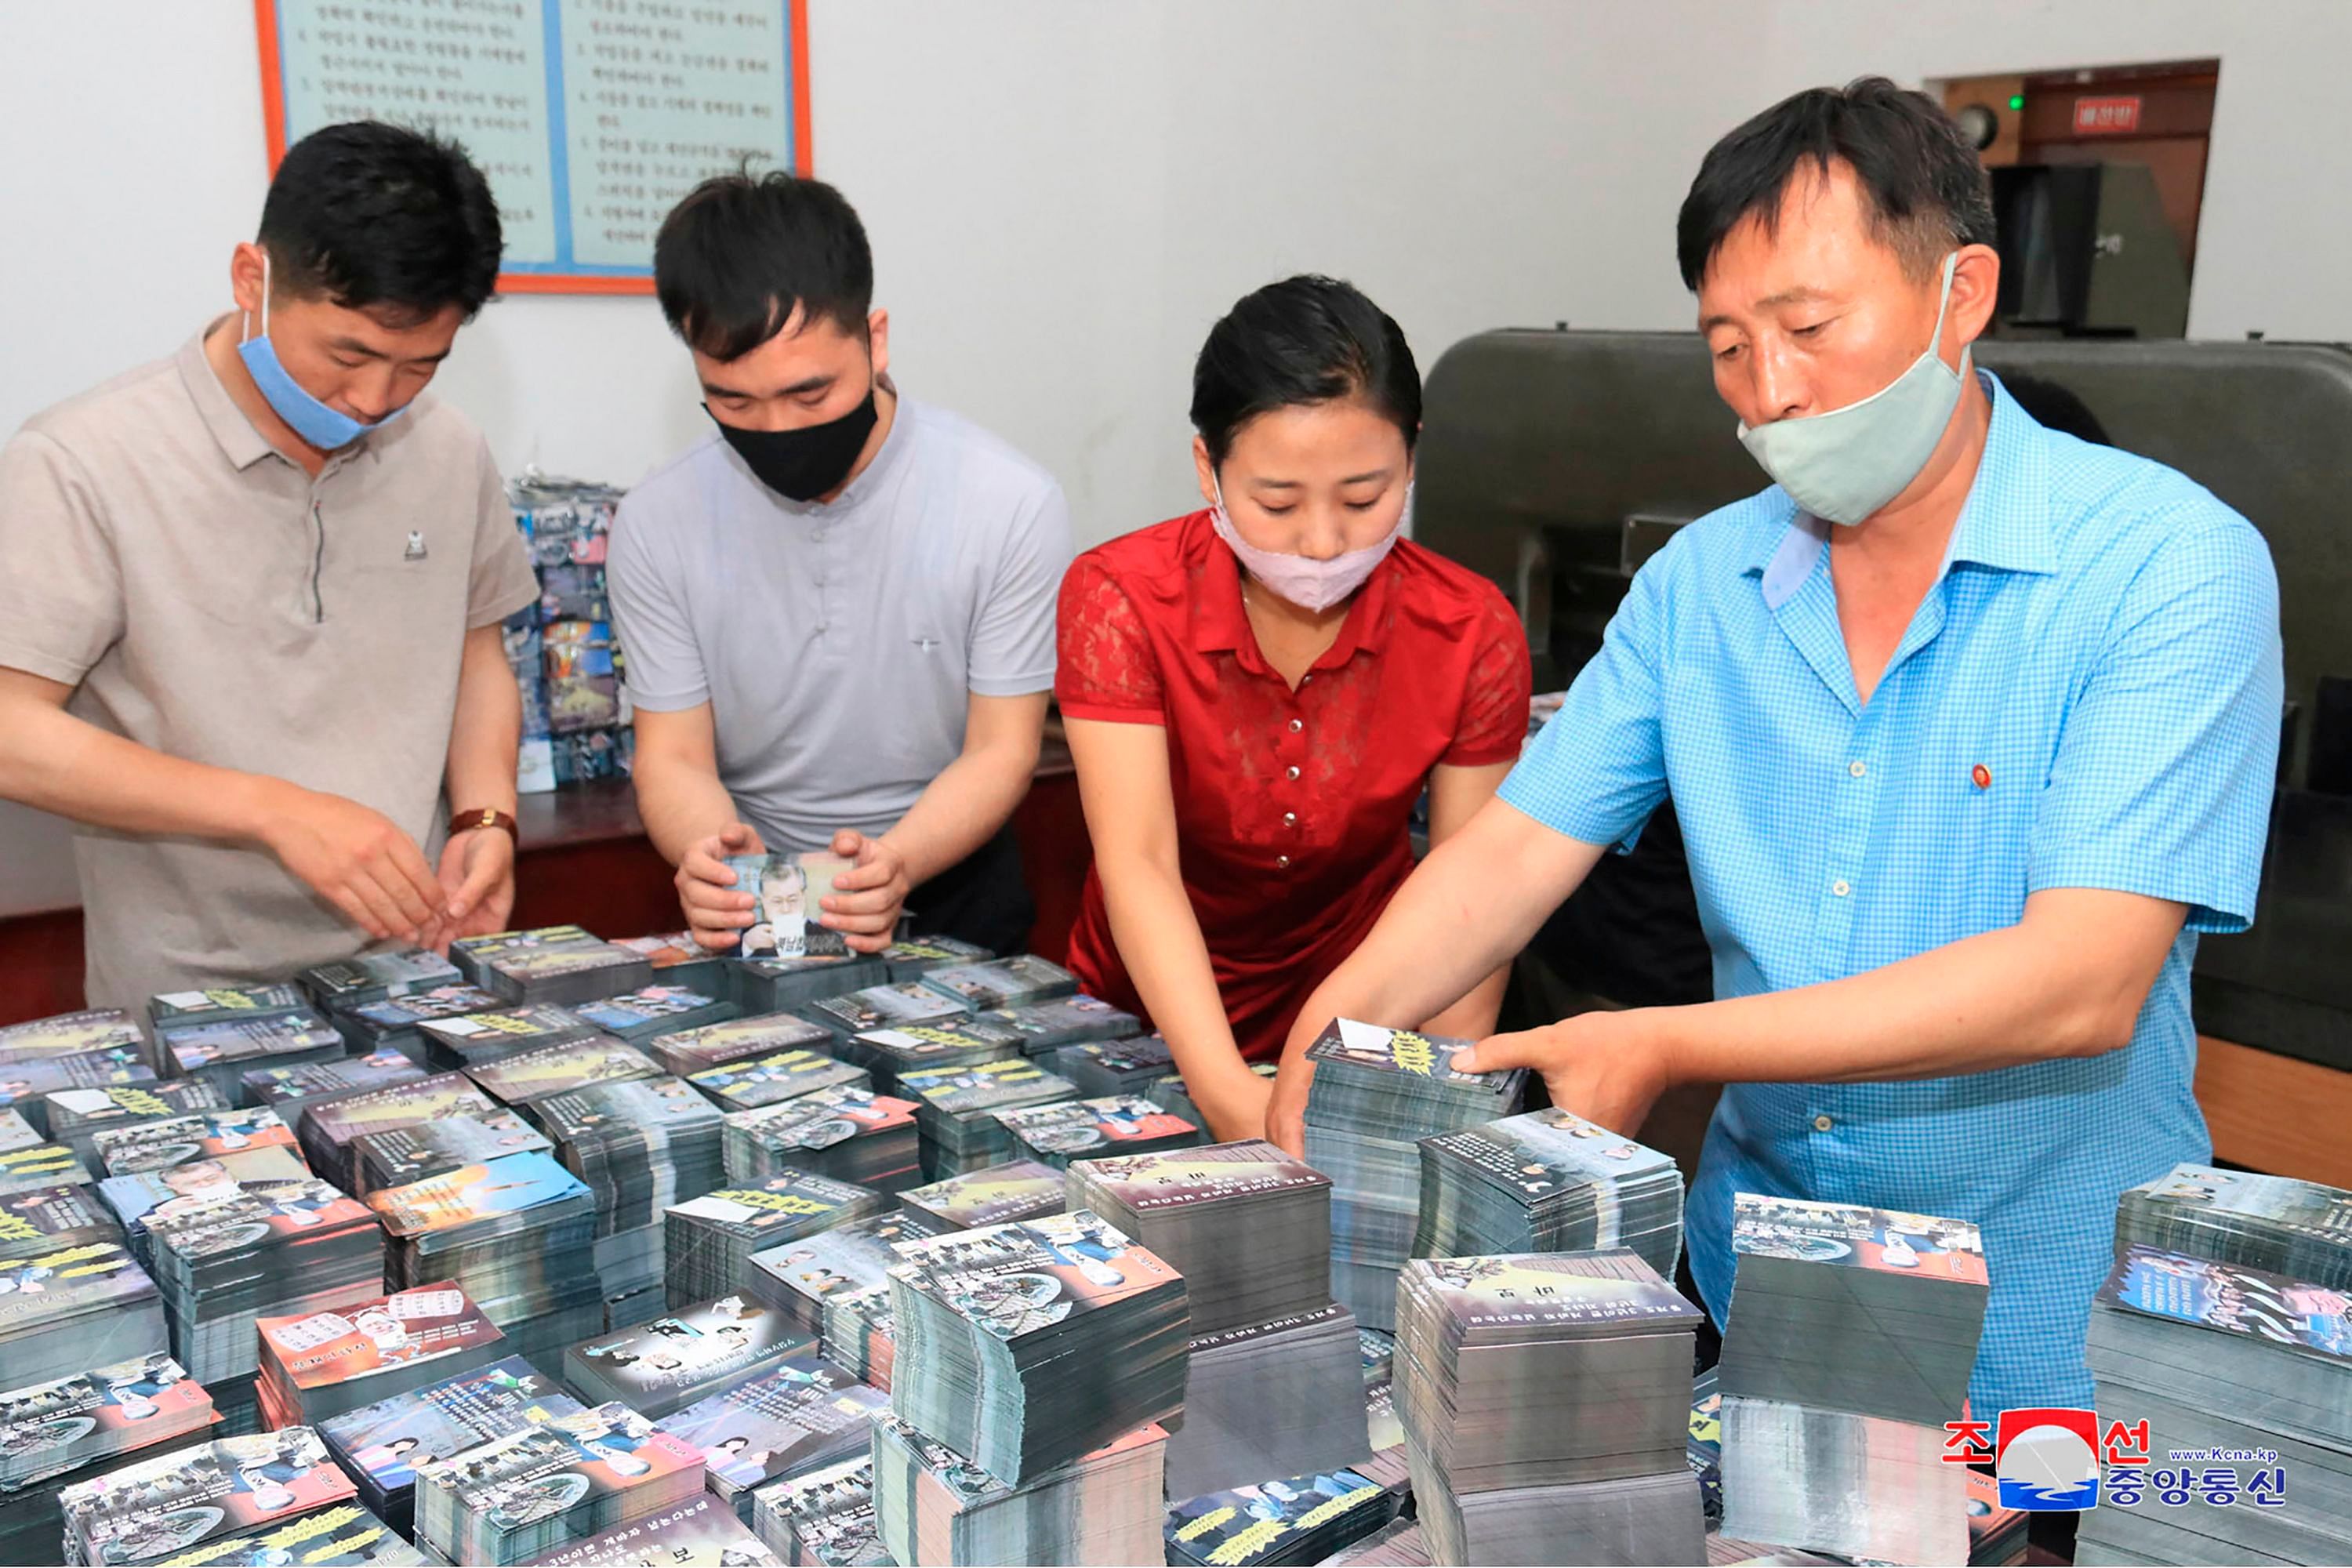 North Koreans preparing anti-Seoul leaflets at an undisclosed location in North Korea. Credits: AFP Photo